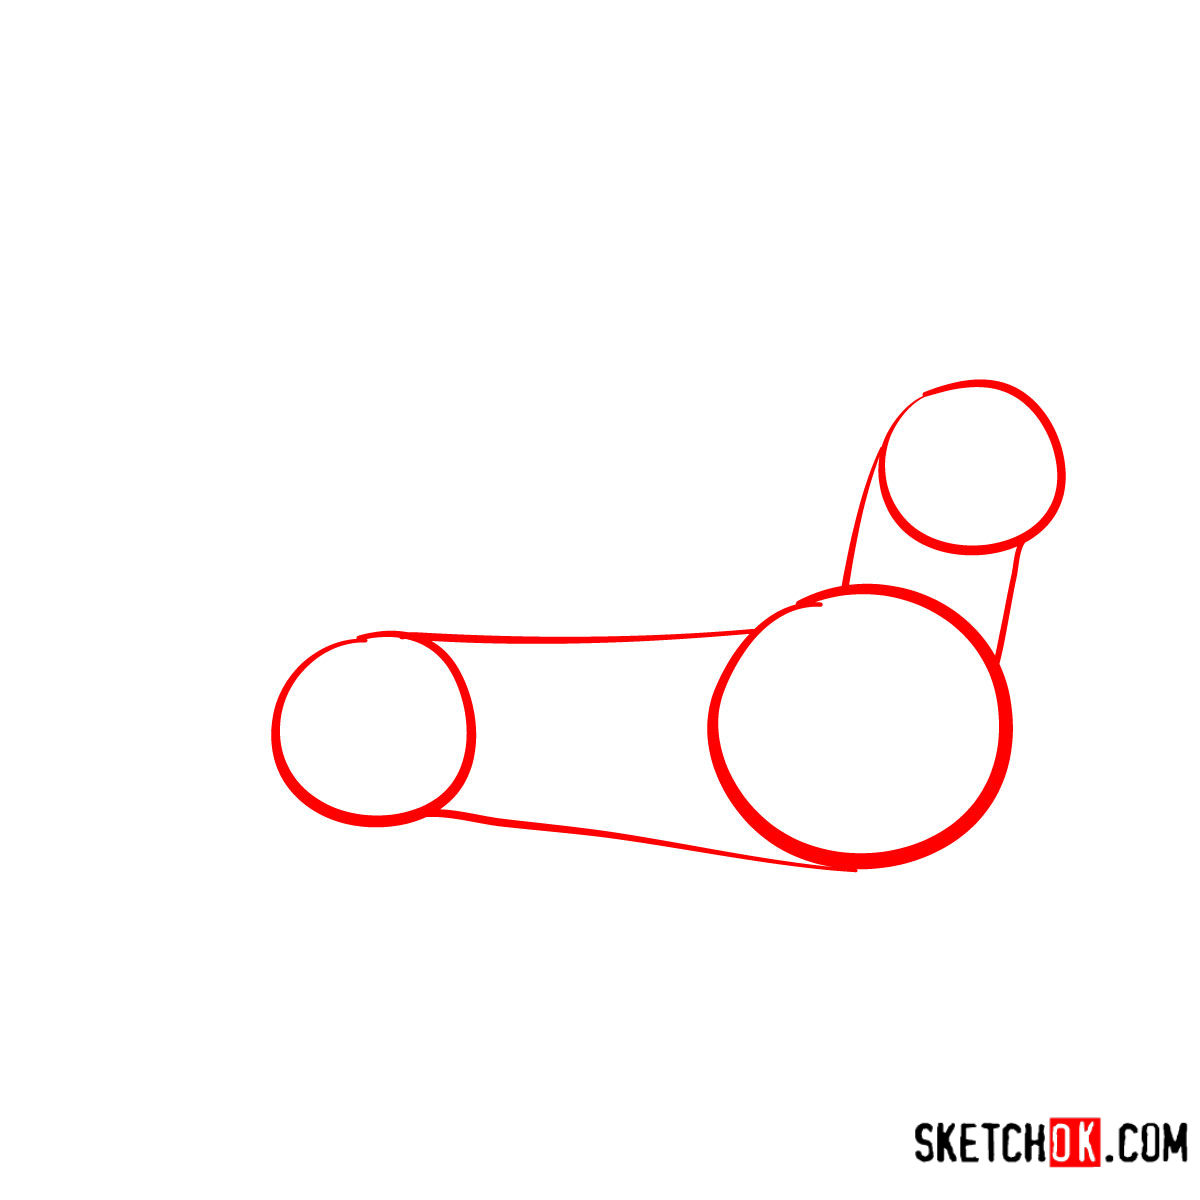 How to draw the Dachshund dog - step 01